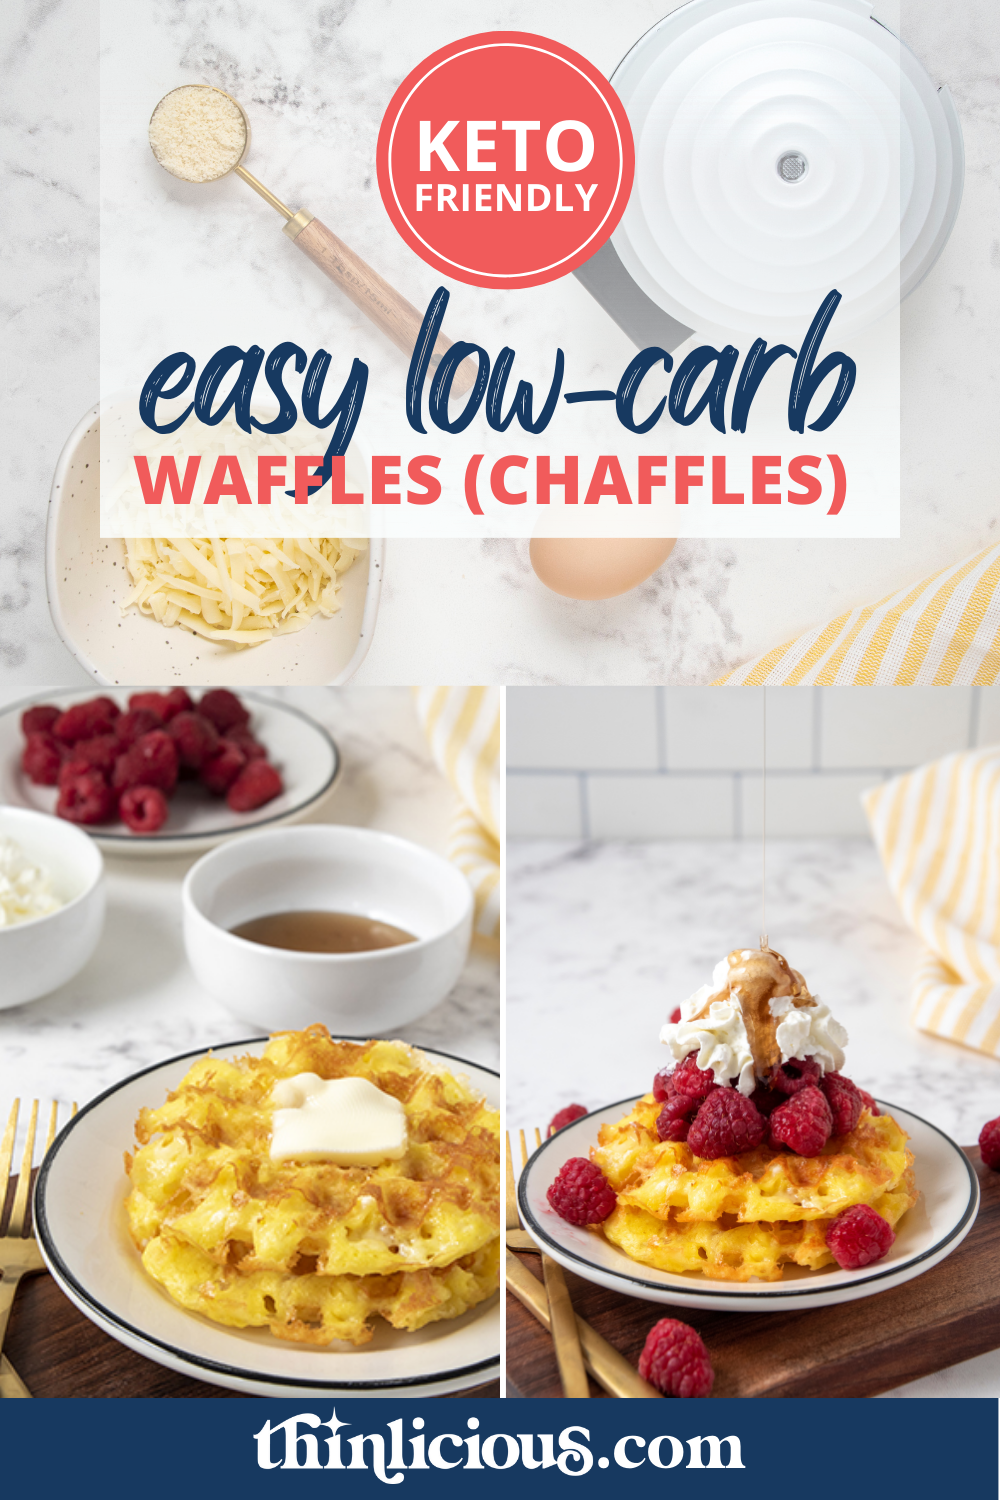 Looking for a quick, easy and tasty option that works for breakfast, dinner or a snack? You need to make these chaffles! Chaffles are low-carb waffles made from cheese and they are delicious!!!